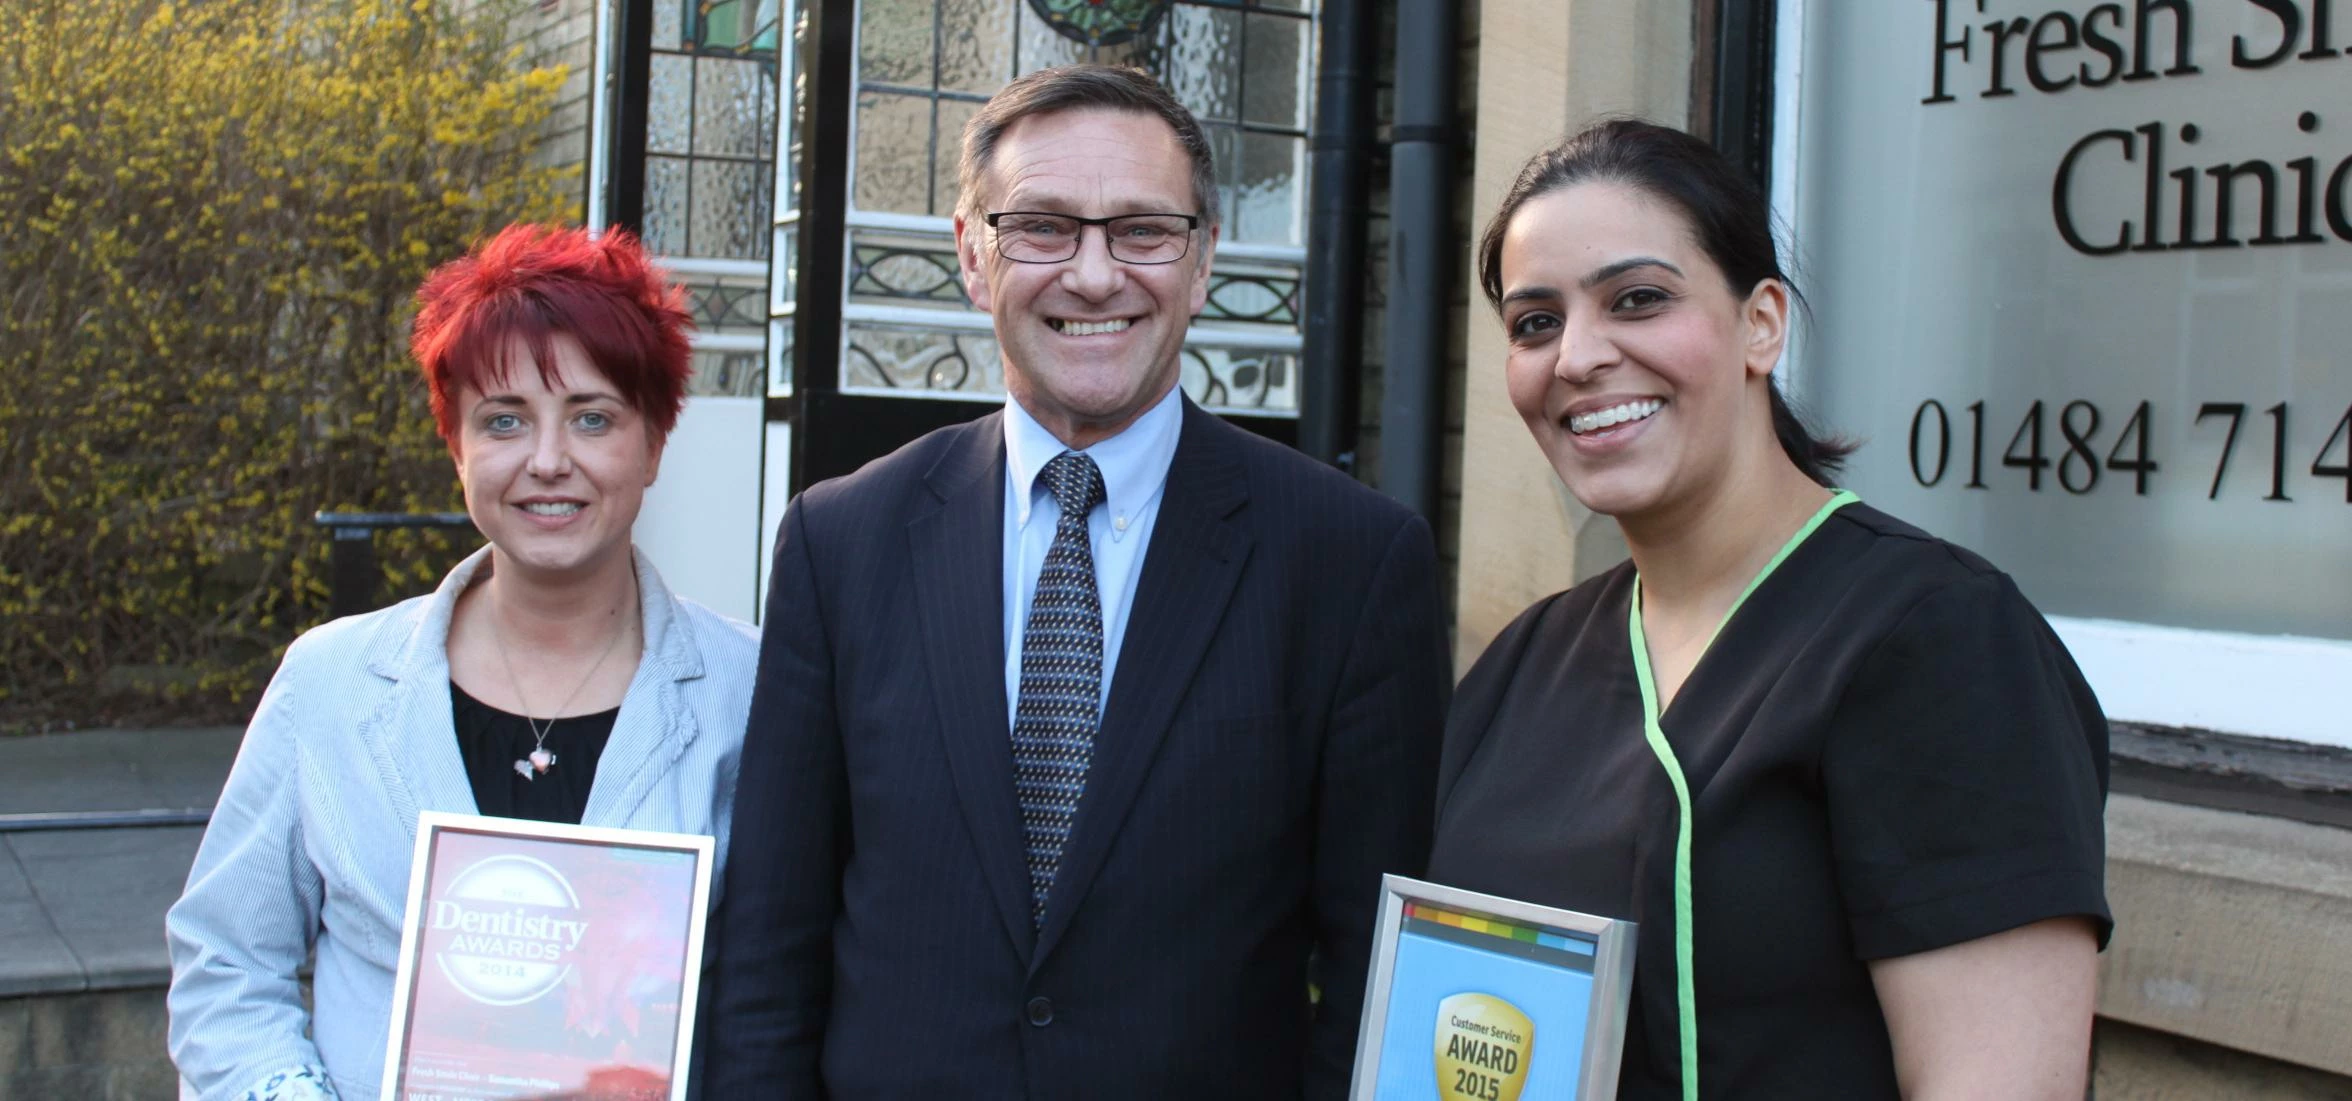 The future's bright: MP Craig Whittaker with Fresh Smile's award-winning team